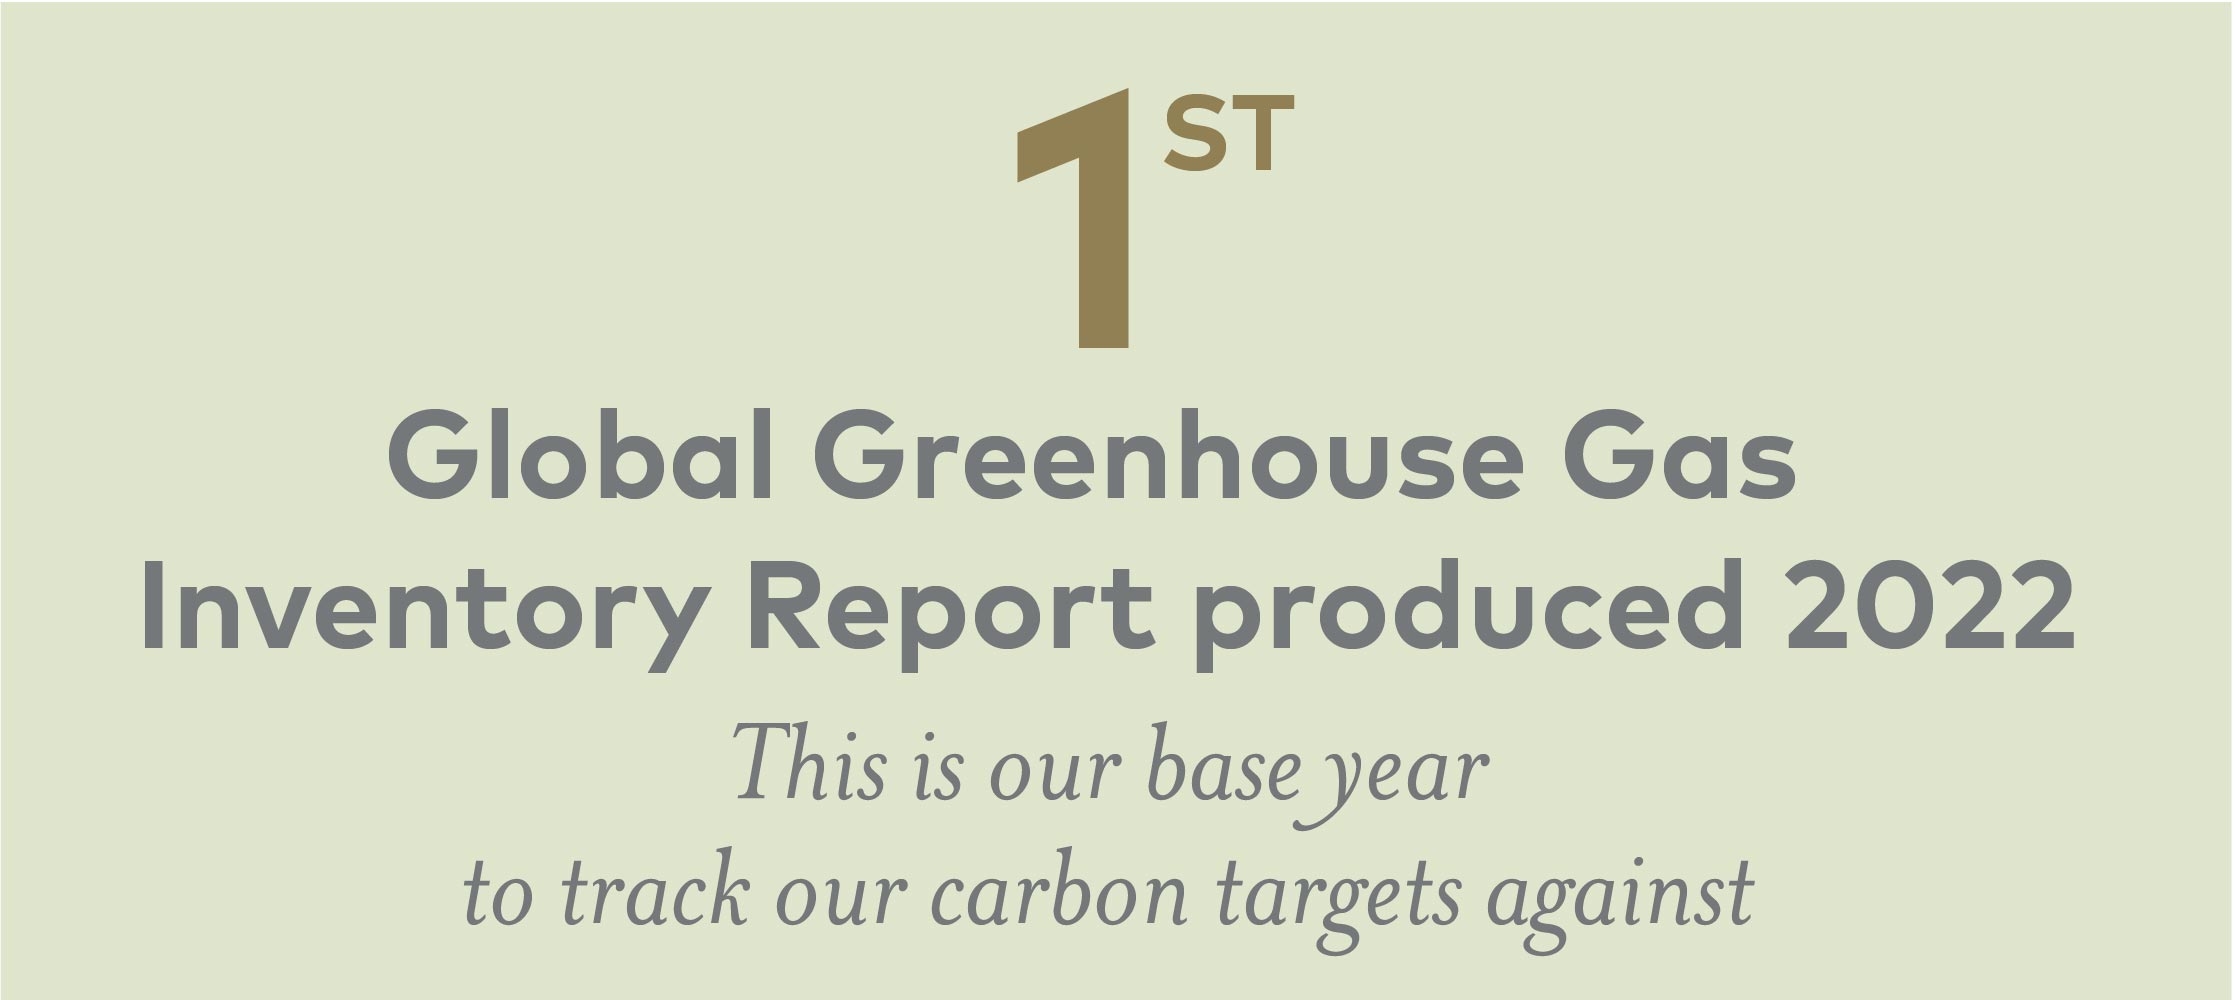   1ST  Global Greenhouse Gas Inventory Report produced 2022This is our base yearto track our carbon targets against